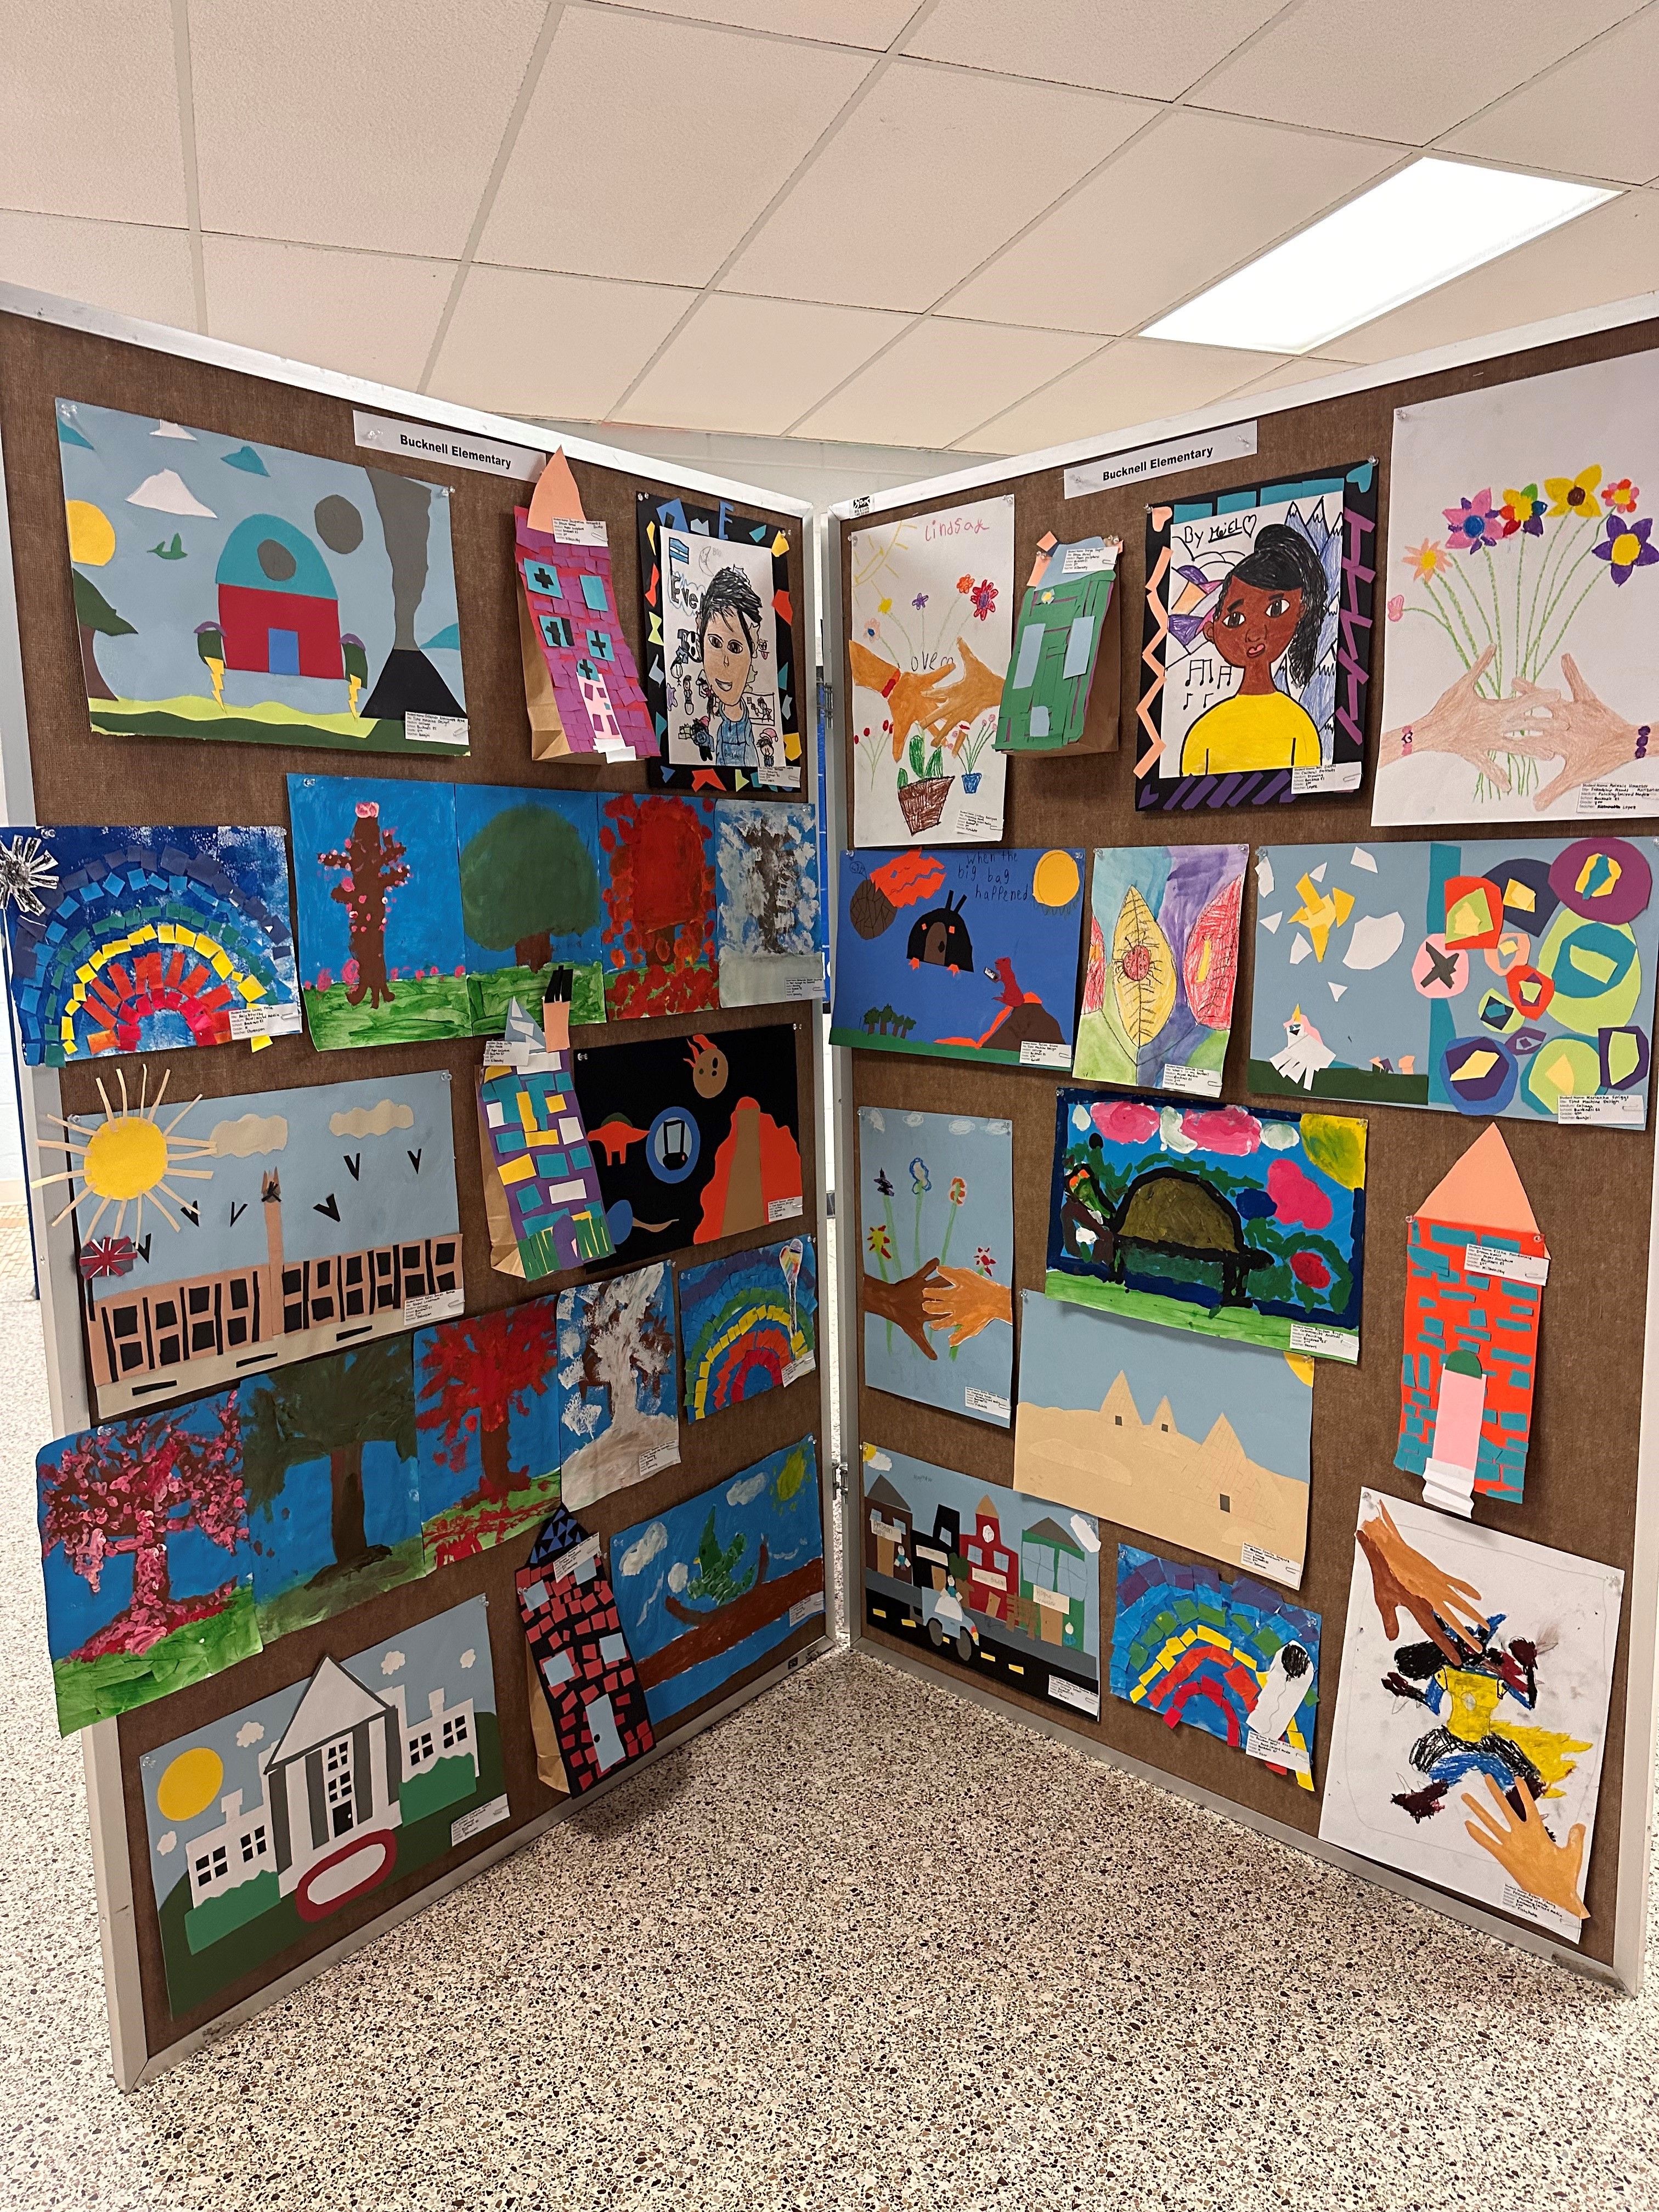 Check out the artwork from Bucknell at the Annual Pyramid Art Show!